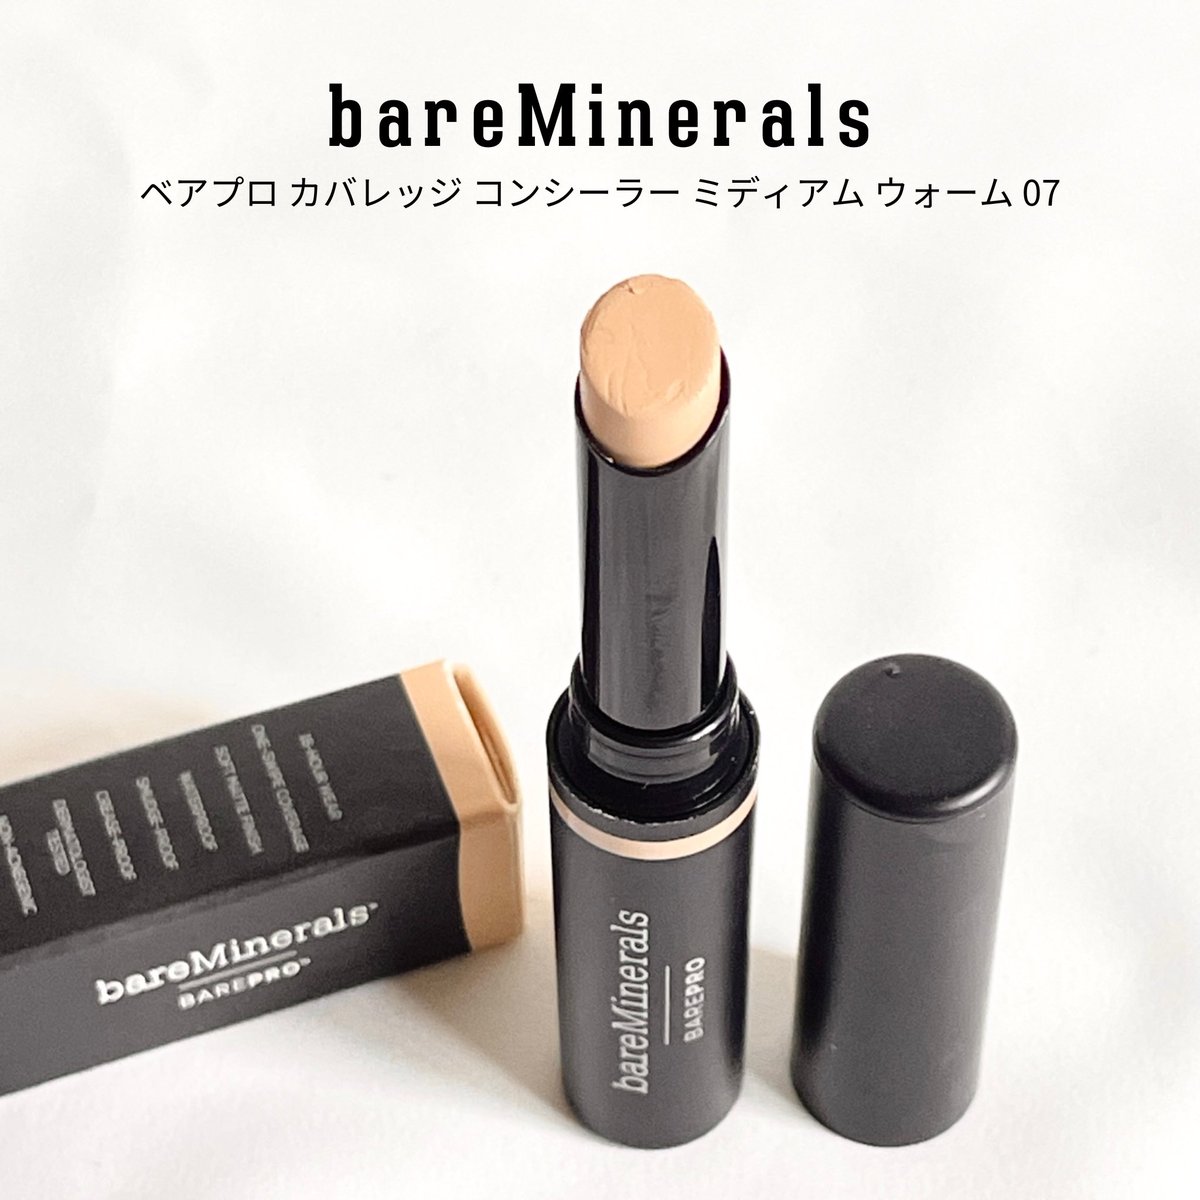 I added things like bareMinerals and others❤️
Brand-name products are affordable♪
Please check it out･:*+.\(( °ω° ))/.:+ ･:*
jp.mercari.com/user/profile/2…
#Mercari #Buyee #Bibian #doorzo #Reuse #Used #Necktie #Accessories #Cosmetics #perfume